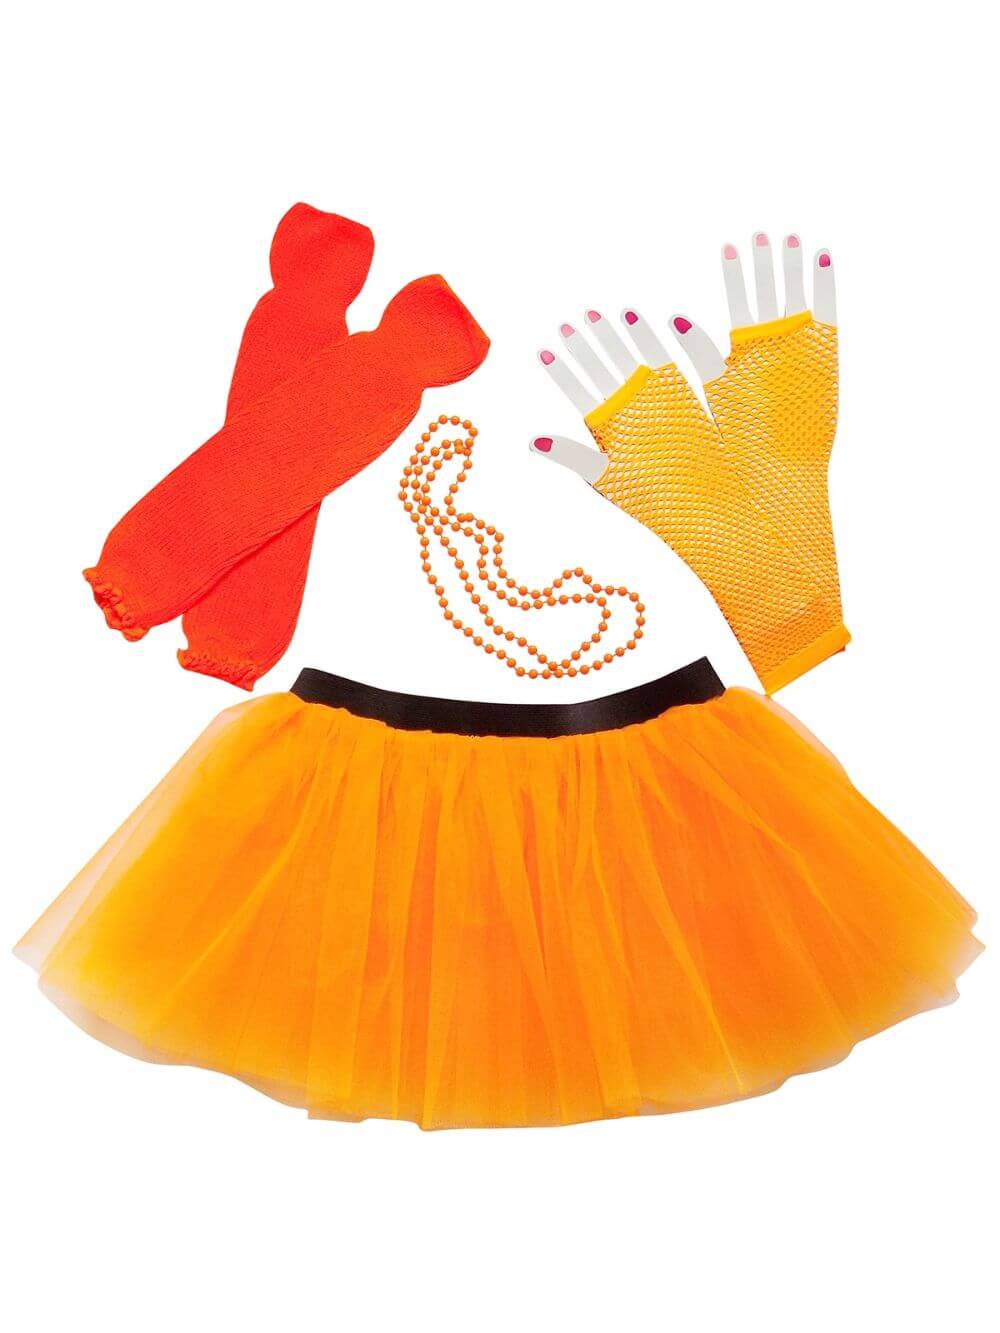 80s Costume for Teens or Women in Neon Orange with Tutu & Accessories - Sydney So Sweet